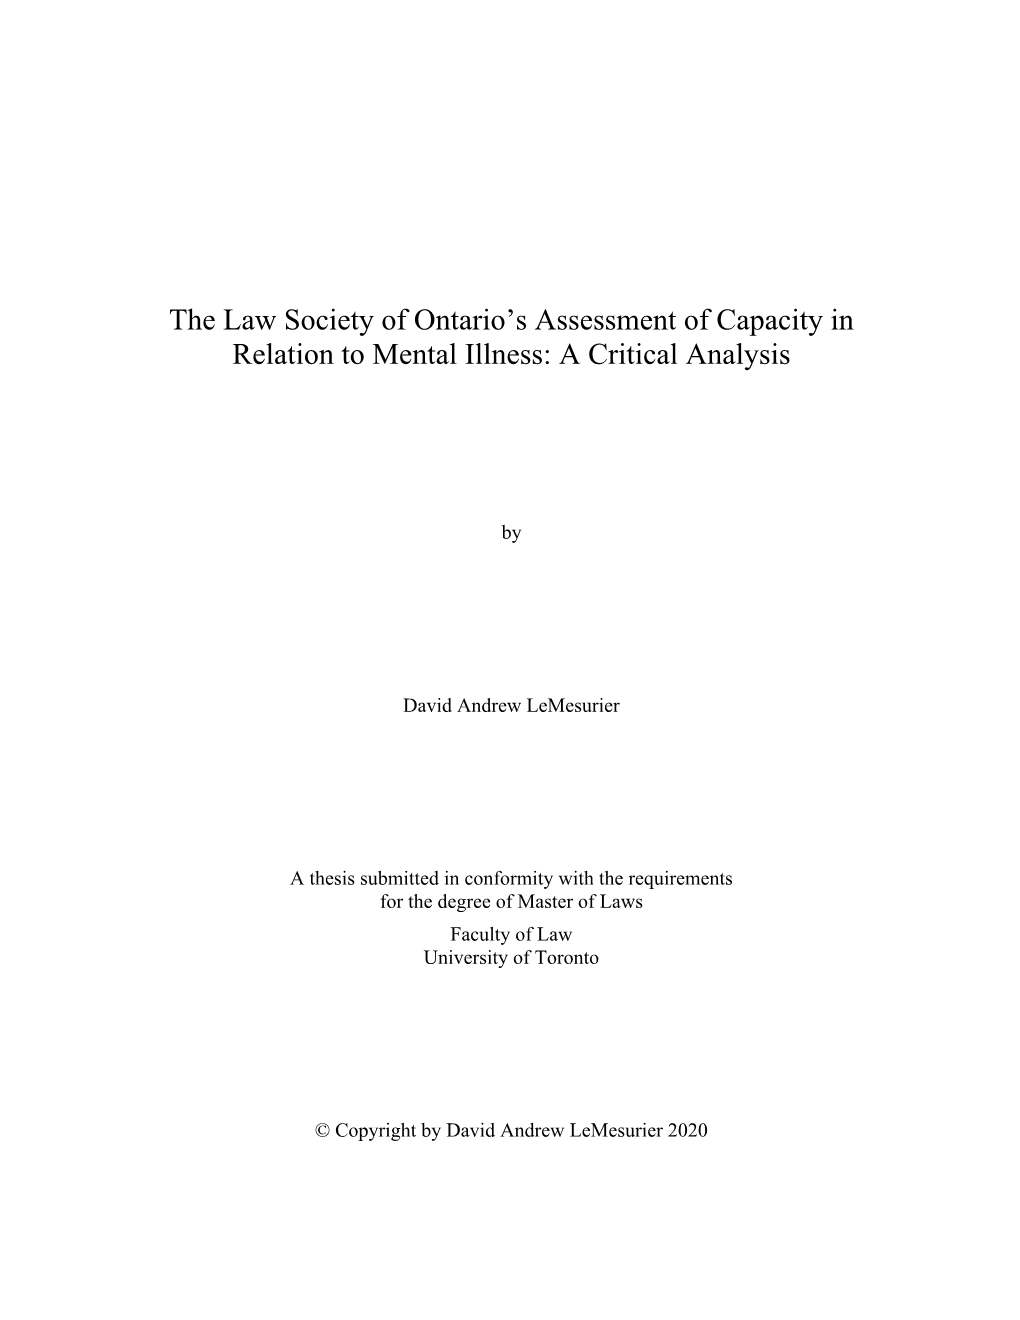 The Law Society of Ontario's Assessment of Capacity In